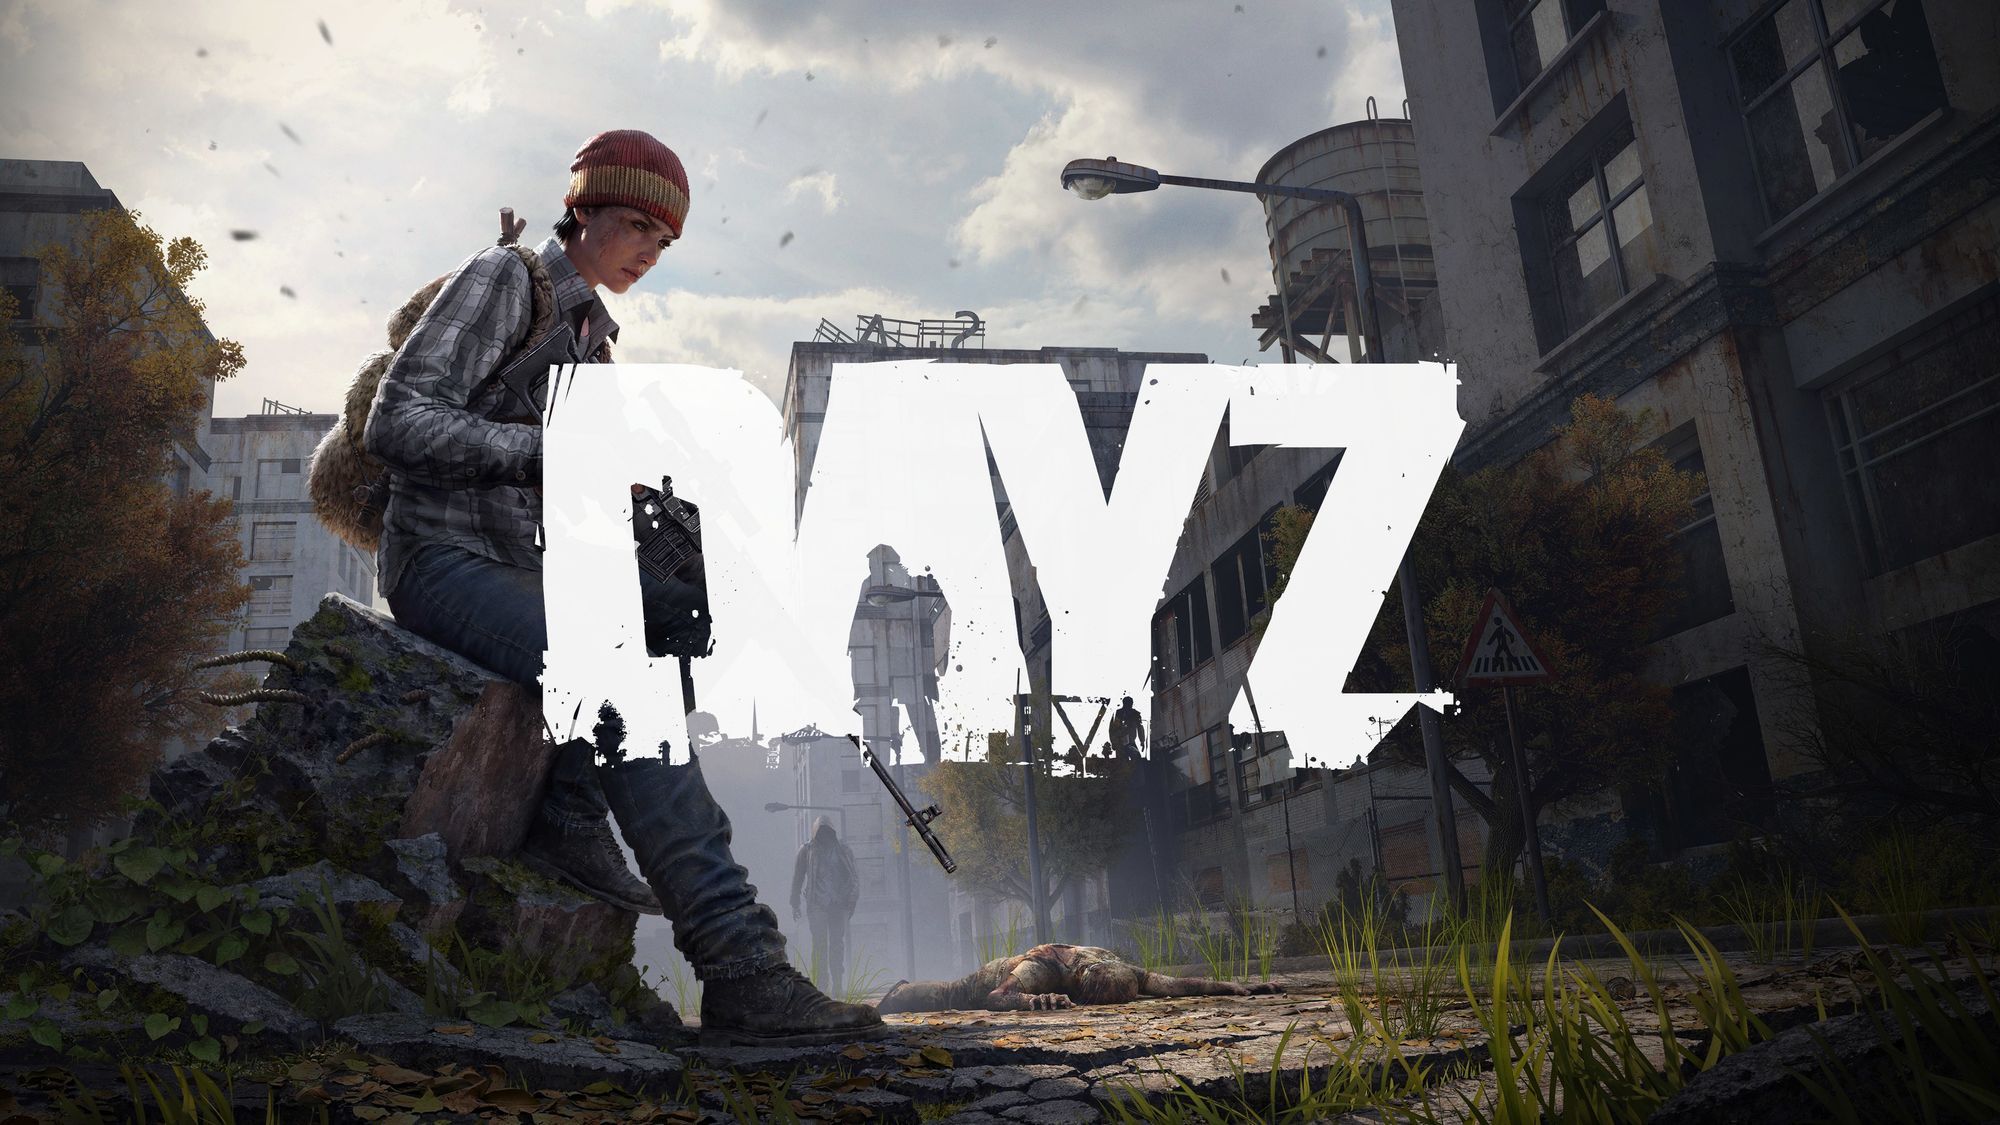 DayZ: Key - Buy DayZ. These providers are available